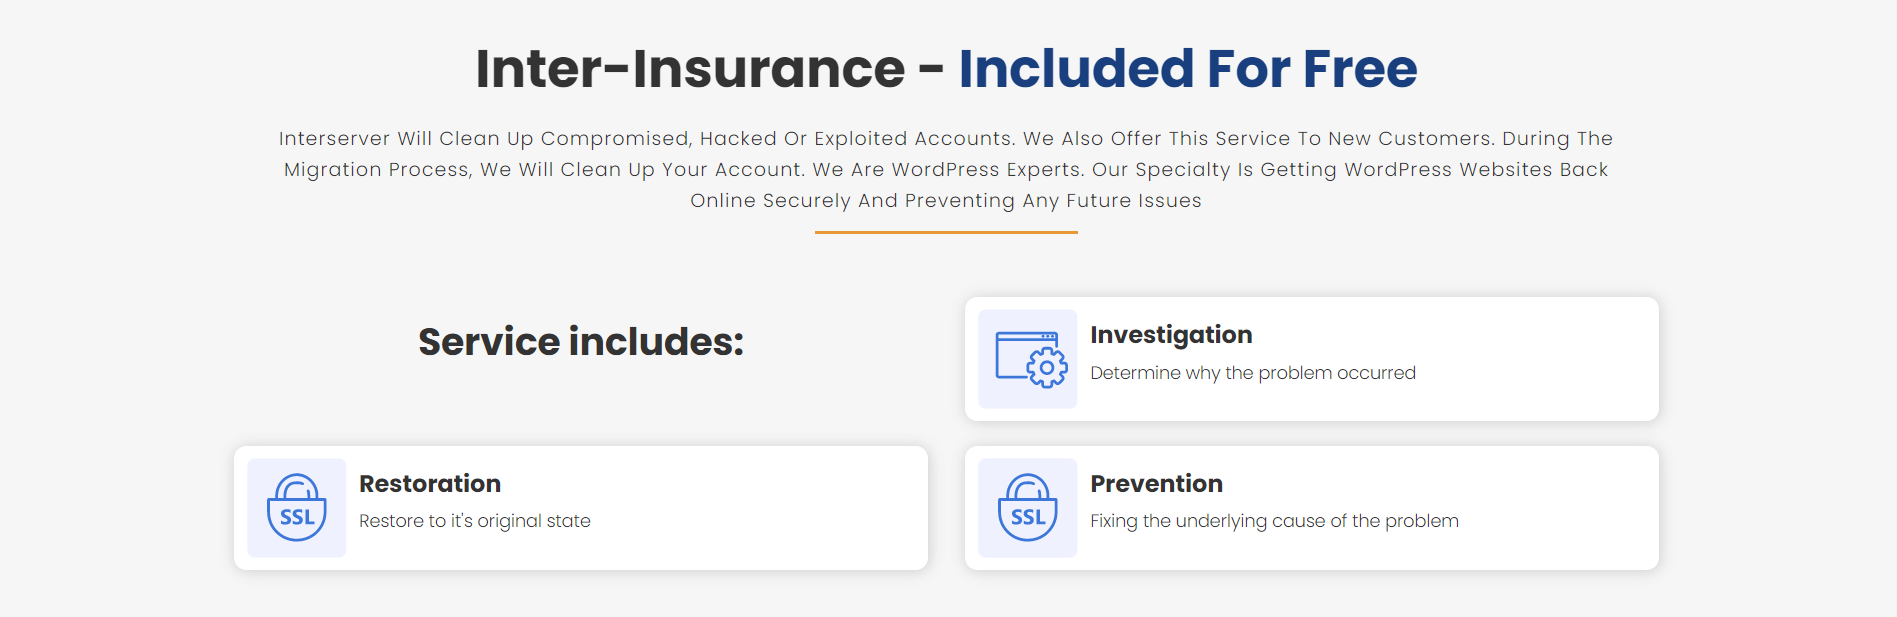 InterServer’s insurance product